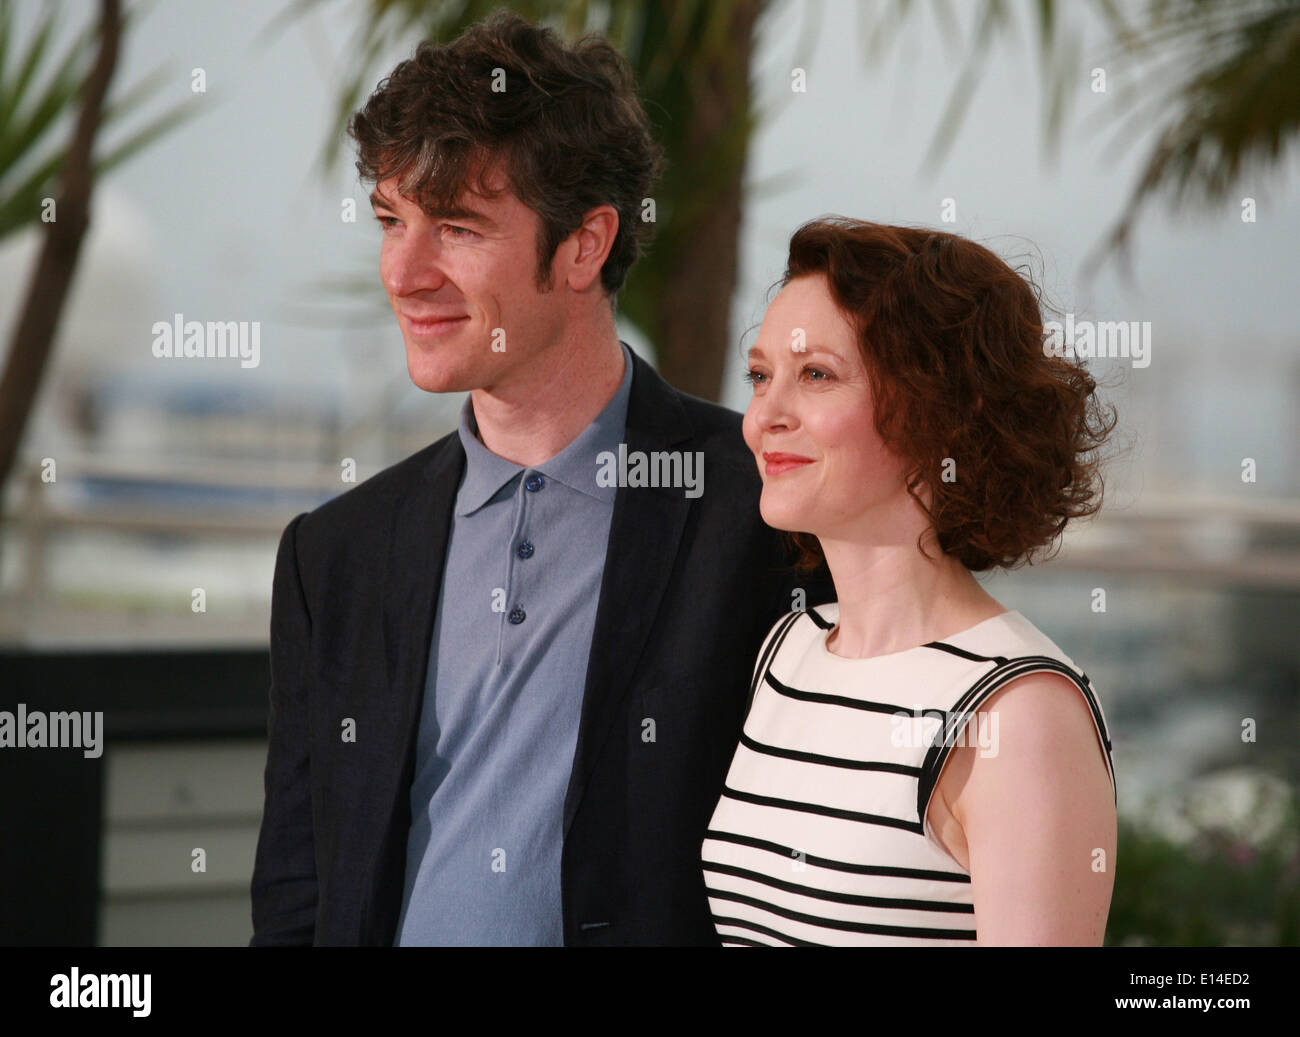 Cannes, France. 22nd May 2014. actor Barry Ward and Actress Simone Kirby at  the photo call for the film Jimmy's Hall at the 67th Cannes Film Festival,  Thursday 22nd May 2014, Cannes,